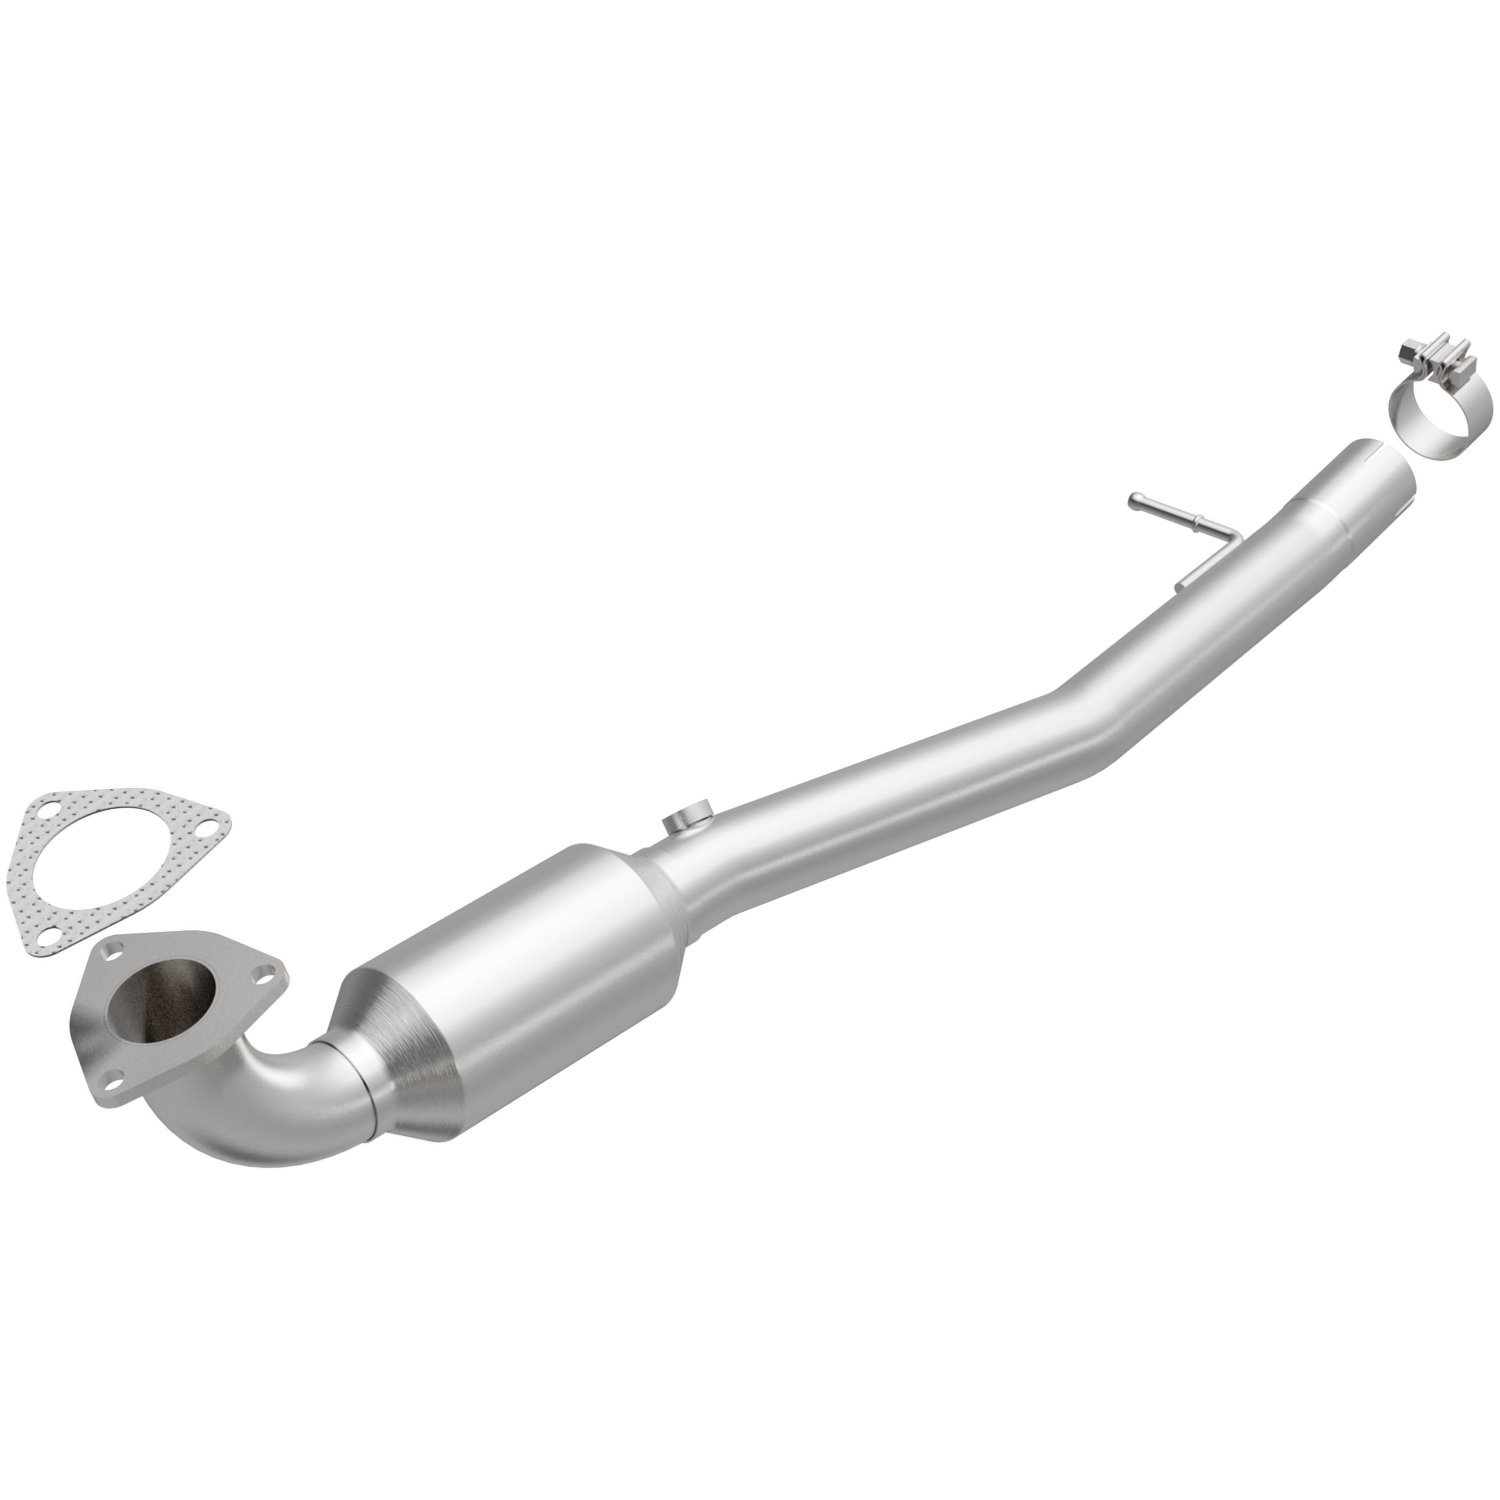 2007-2009 Land Rover Range Rover OEM Grade Federal / EPA Compliant Direct-Fit Catalytic Converter